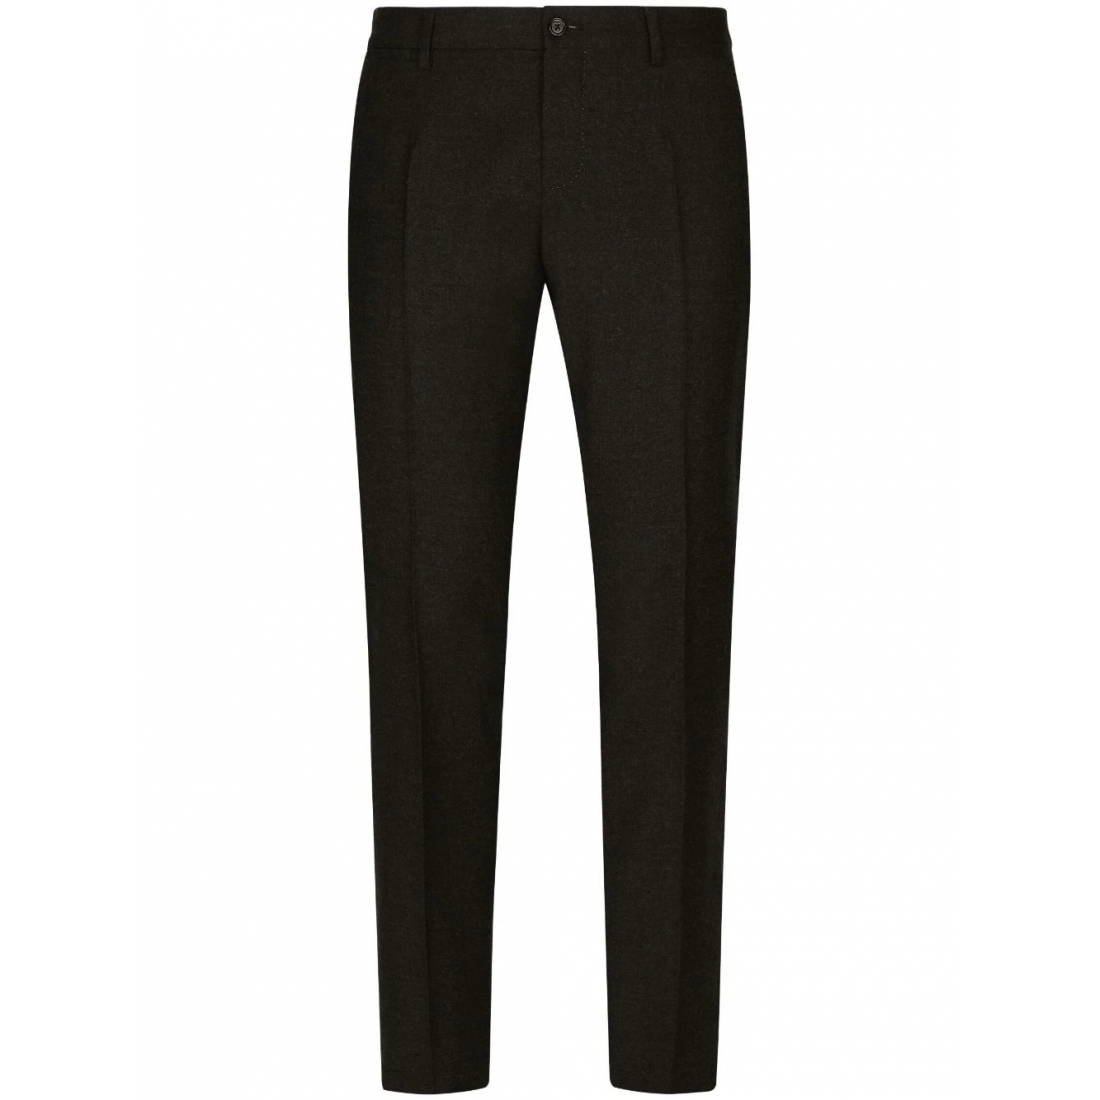 Men's 'Pressed Crease Tailored' Trousers